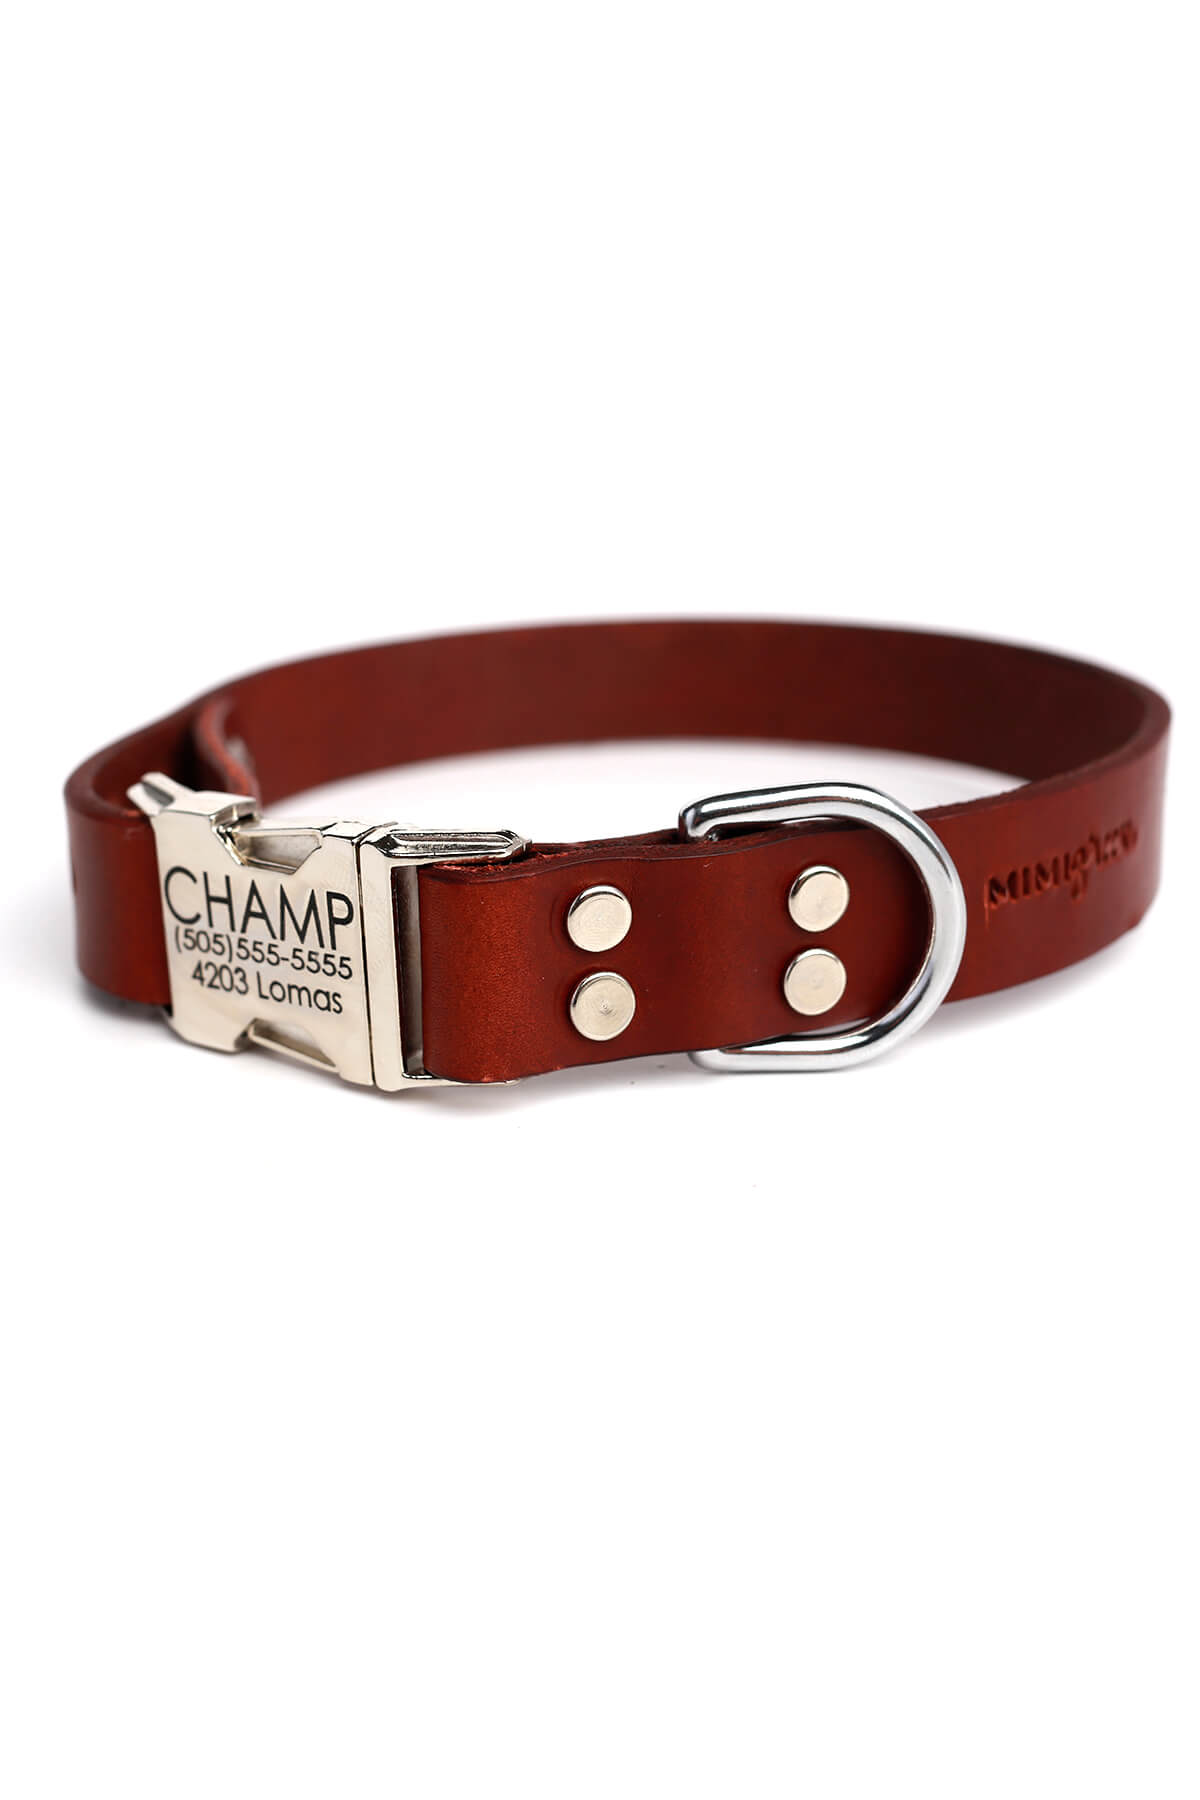 Personalized Engraved Leather Dog Collar - Metal / Brass Buckle